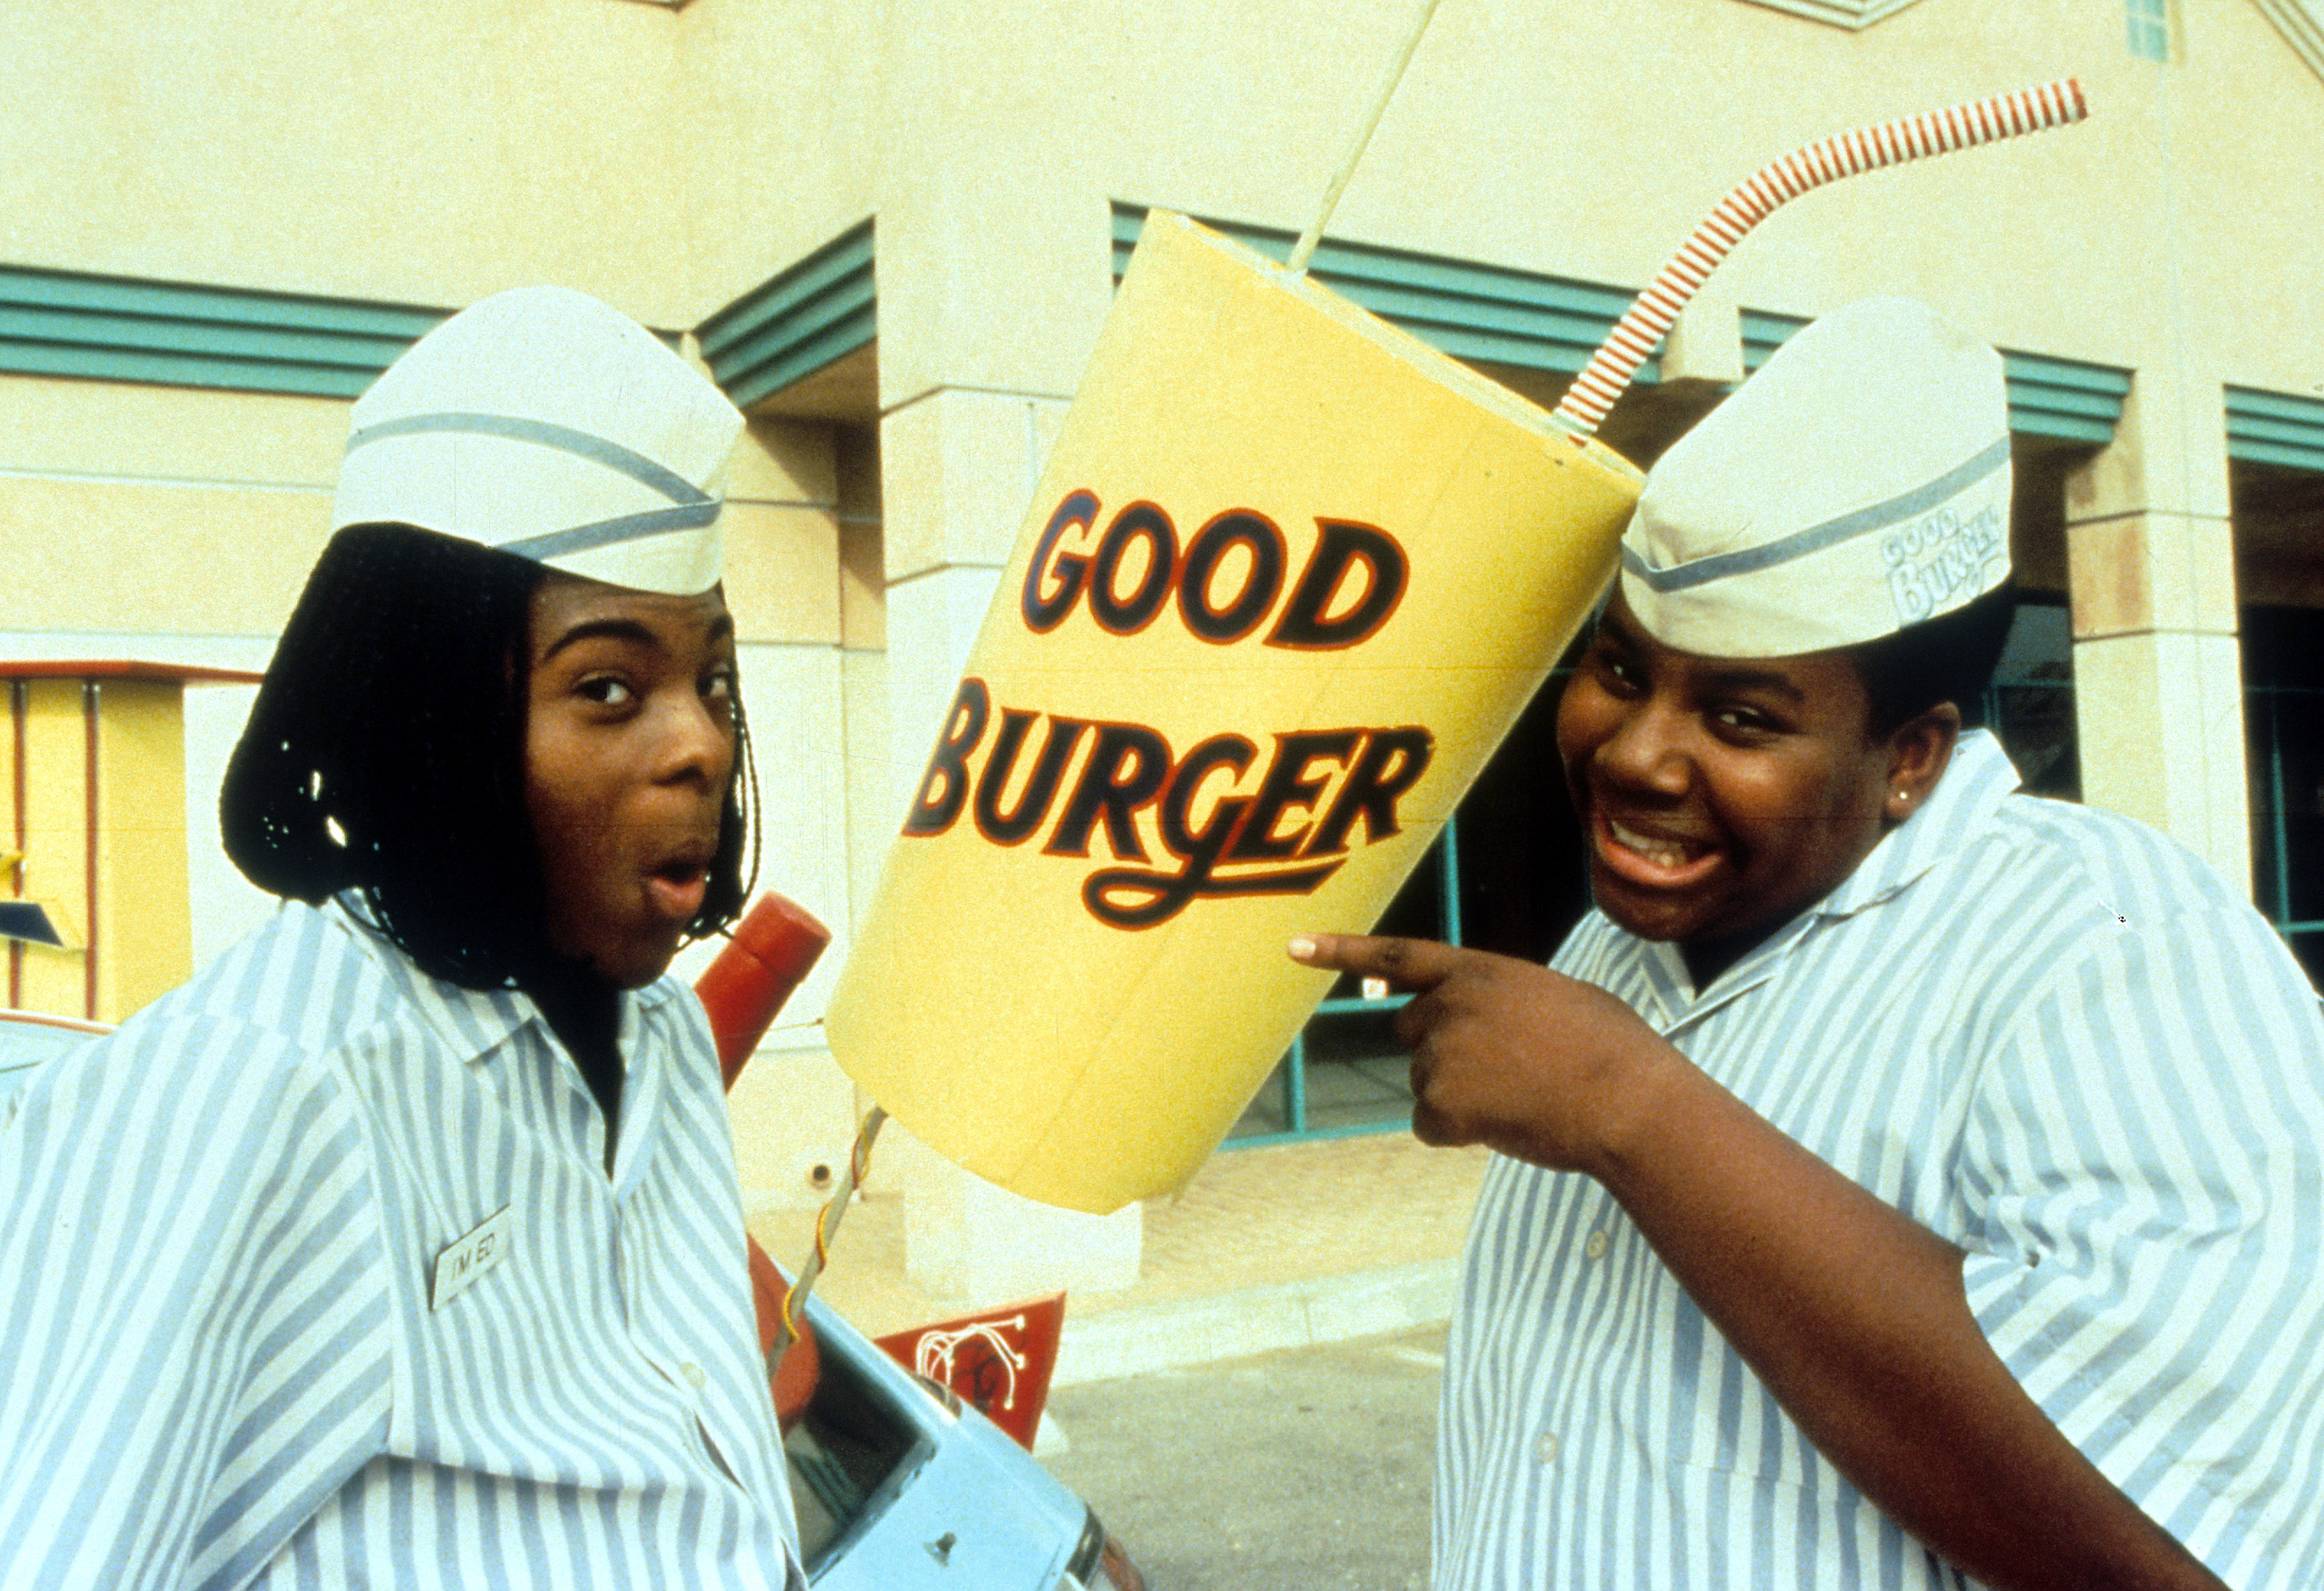 Two men dressed in fast food uniforms gesture to a giant soft drink cup with a “Good Burger” logo